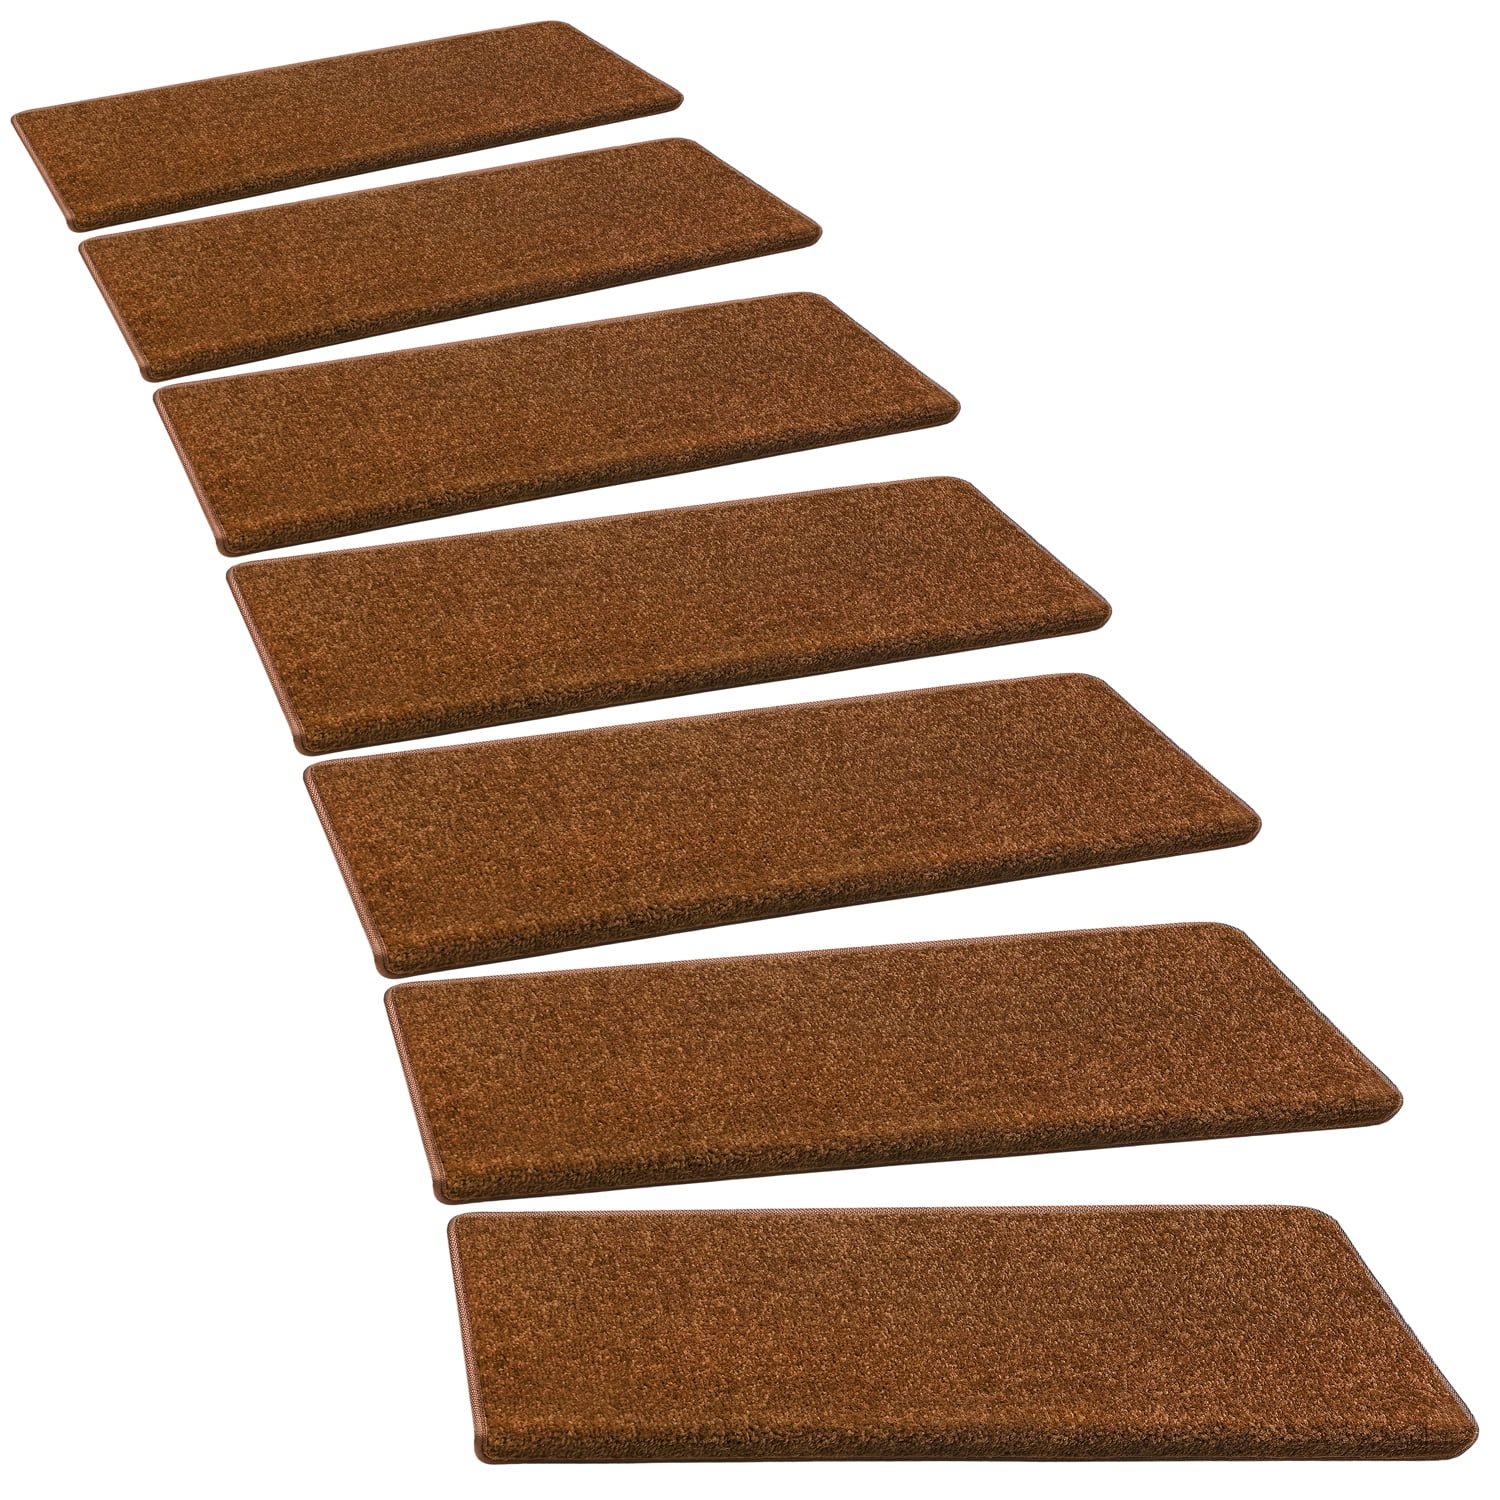 Details about   Carpet Stair Treads Set of 13 Non-Slip Self Adhesive Ultra Plush Soft Washable 